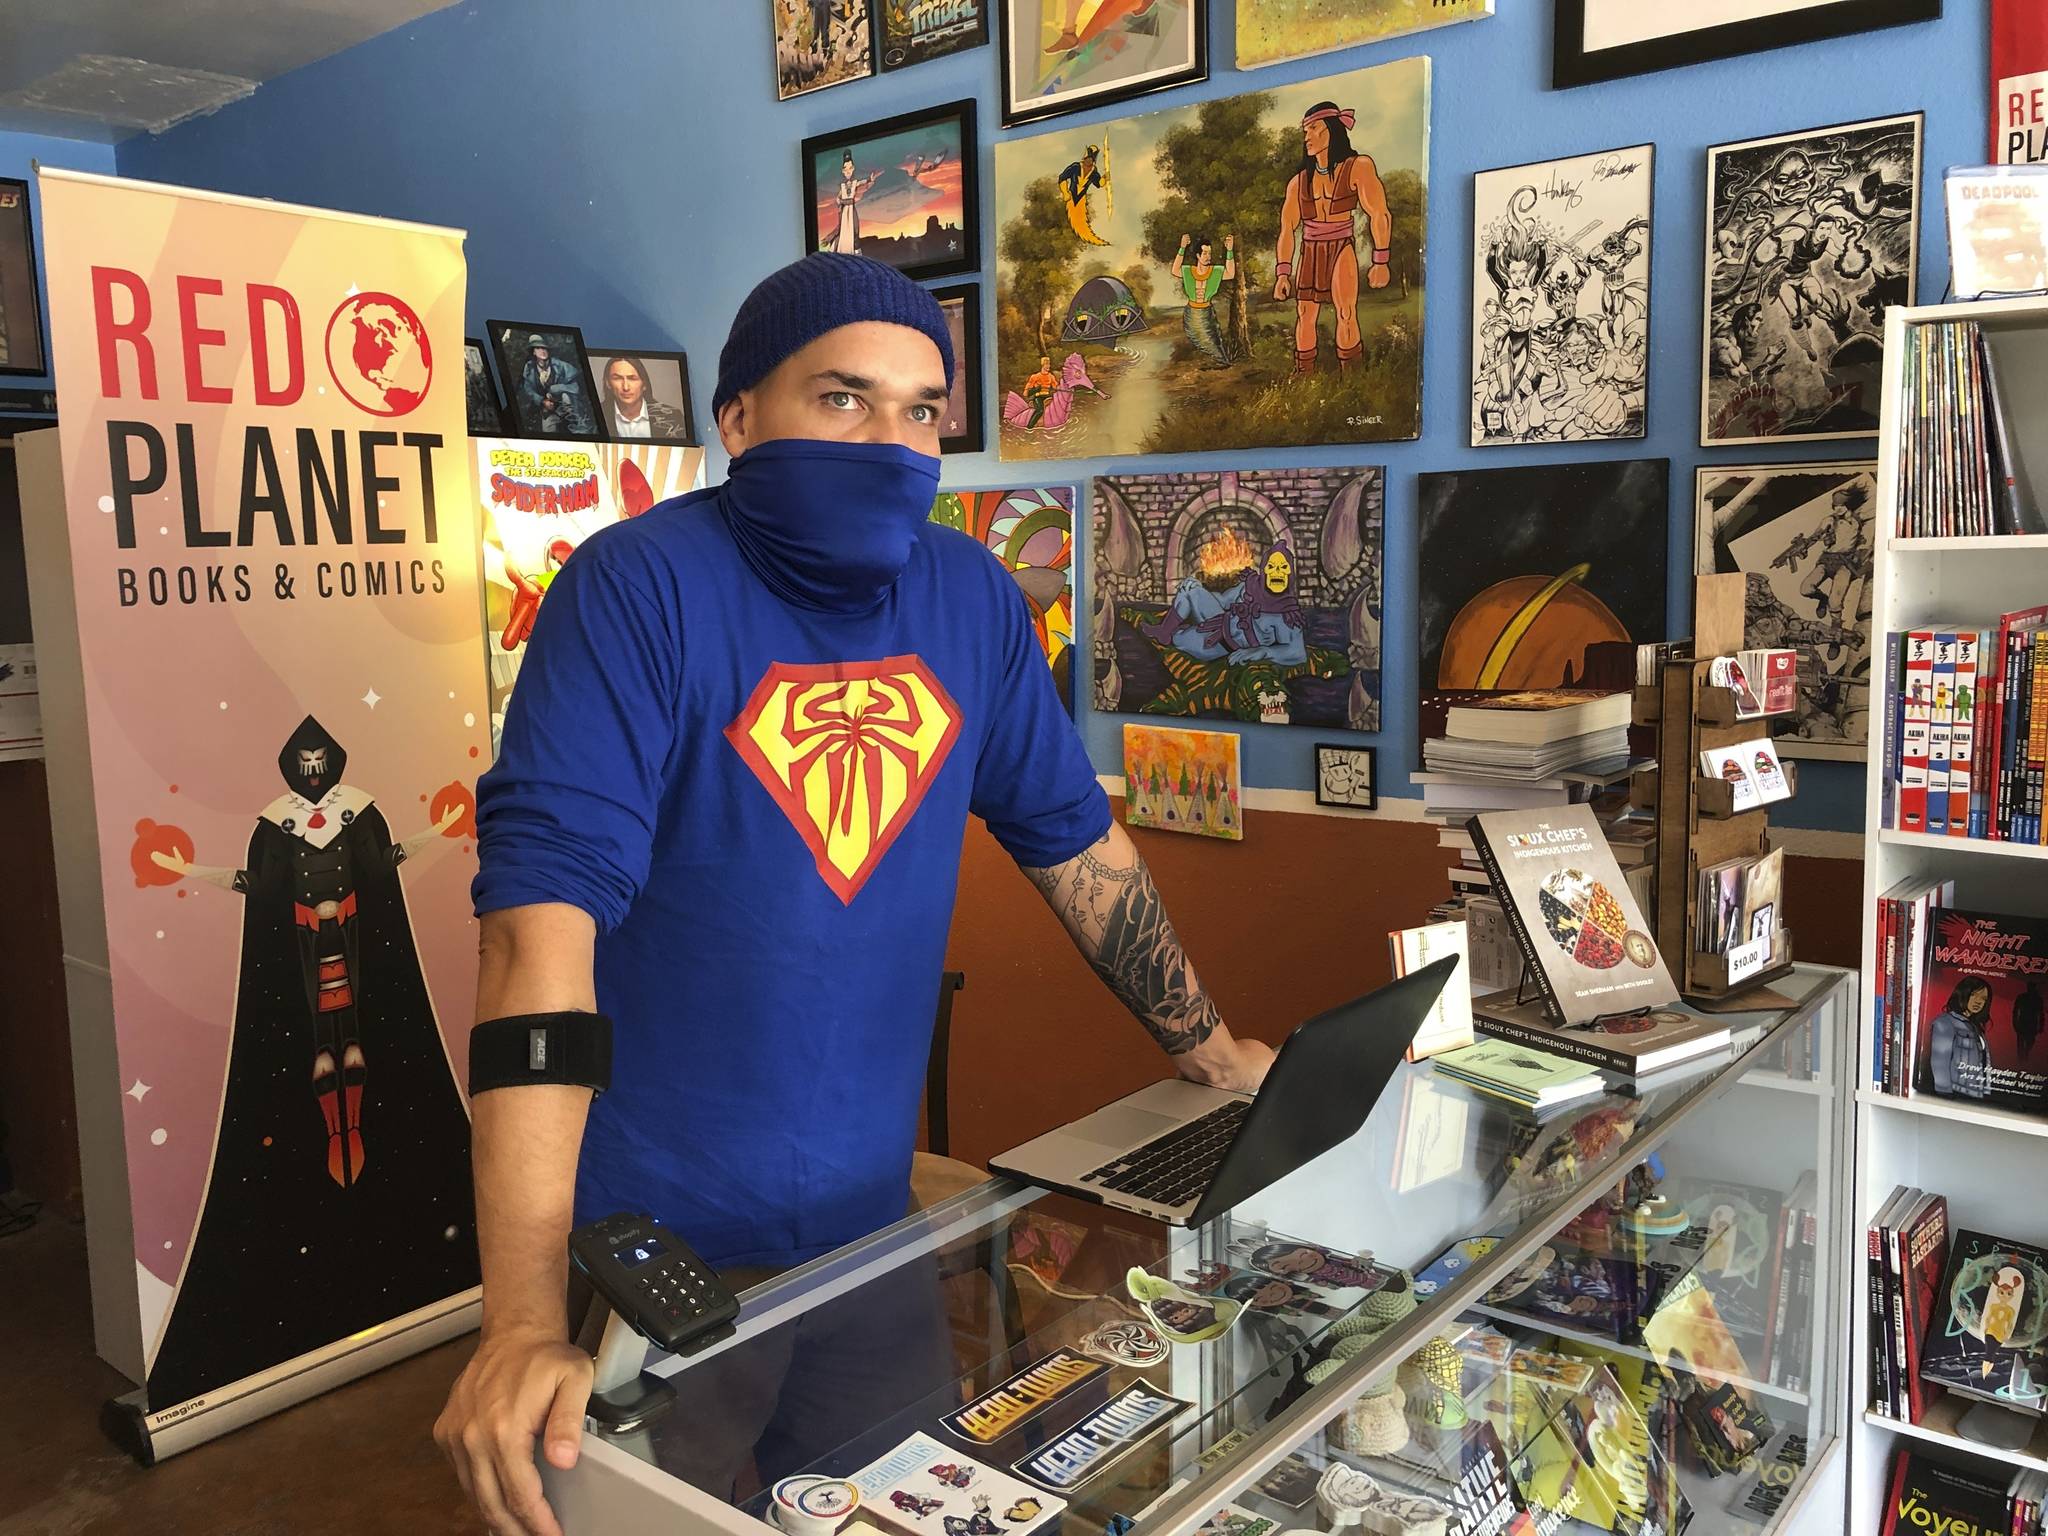 This Aug. 19, 2020, image shows Aaron Cuffee of Red Planet Books & Comics in Albuquerque, N.M., as he discusses the potential that could come from Marvel Comics’ effort to assemble a gallery of Native artists and scribes for “Marvel Voices: Indigenous Voices #1.” The anthology will revisit some of Marvel’s Native characters. (AP Photo / Susan Montoya Bryan)